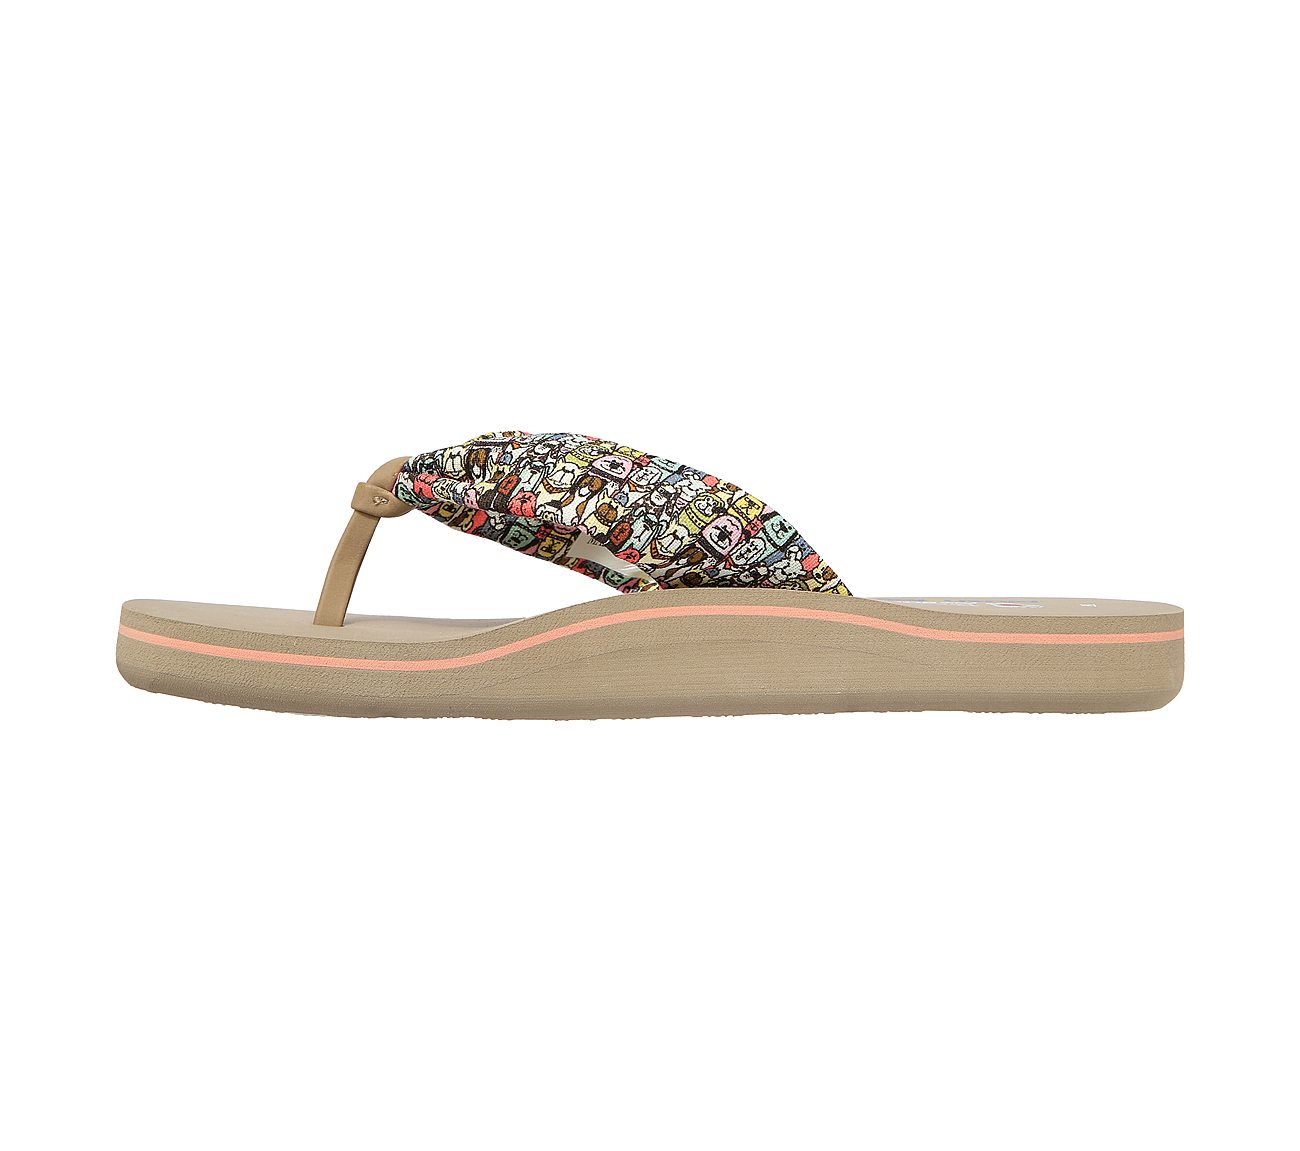 BOBS SUNSET - ENDLESS BEACH, TAUPE/MULTI Footwear Left View